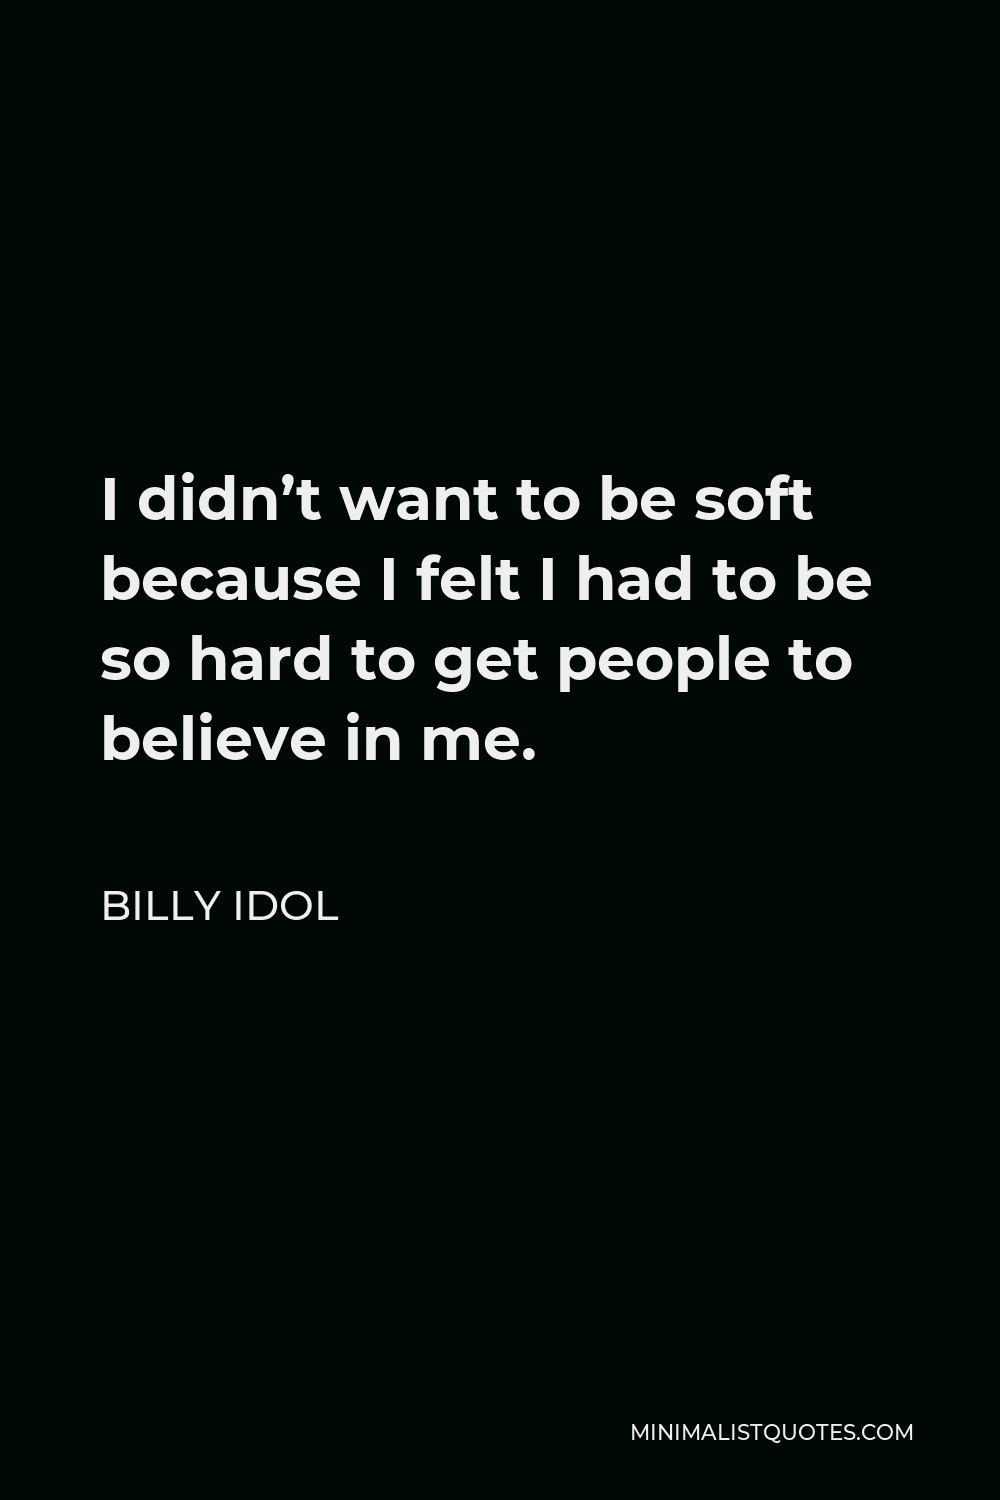 Billy Idol Quote - I didn’t want to be soft because I felt I had to be so hard to get people to believe in me.